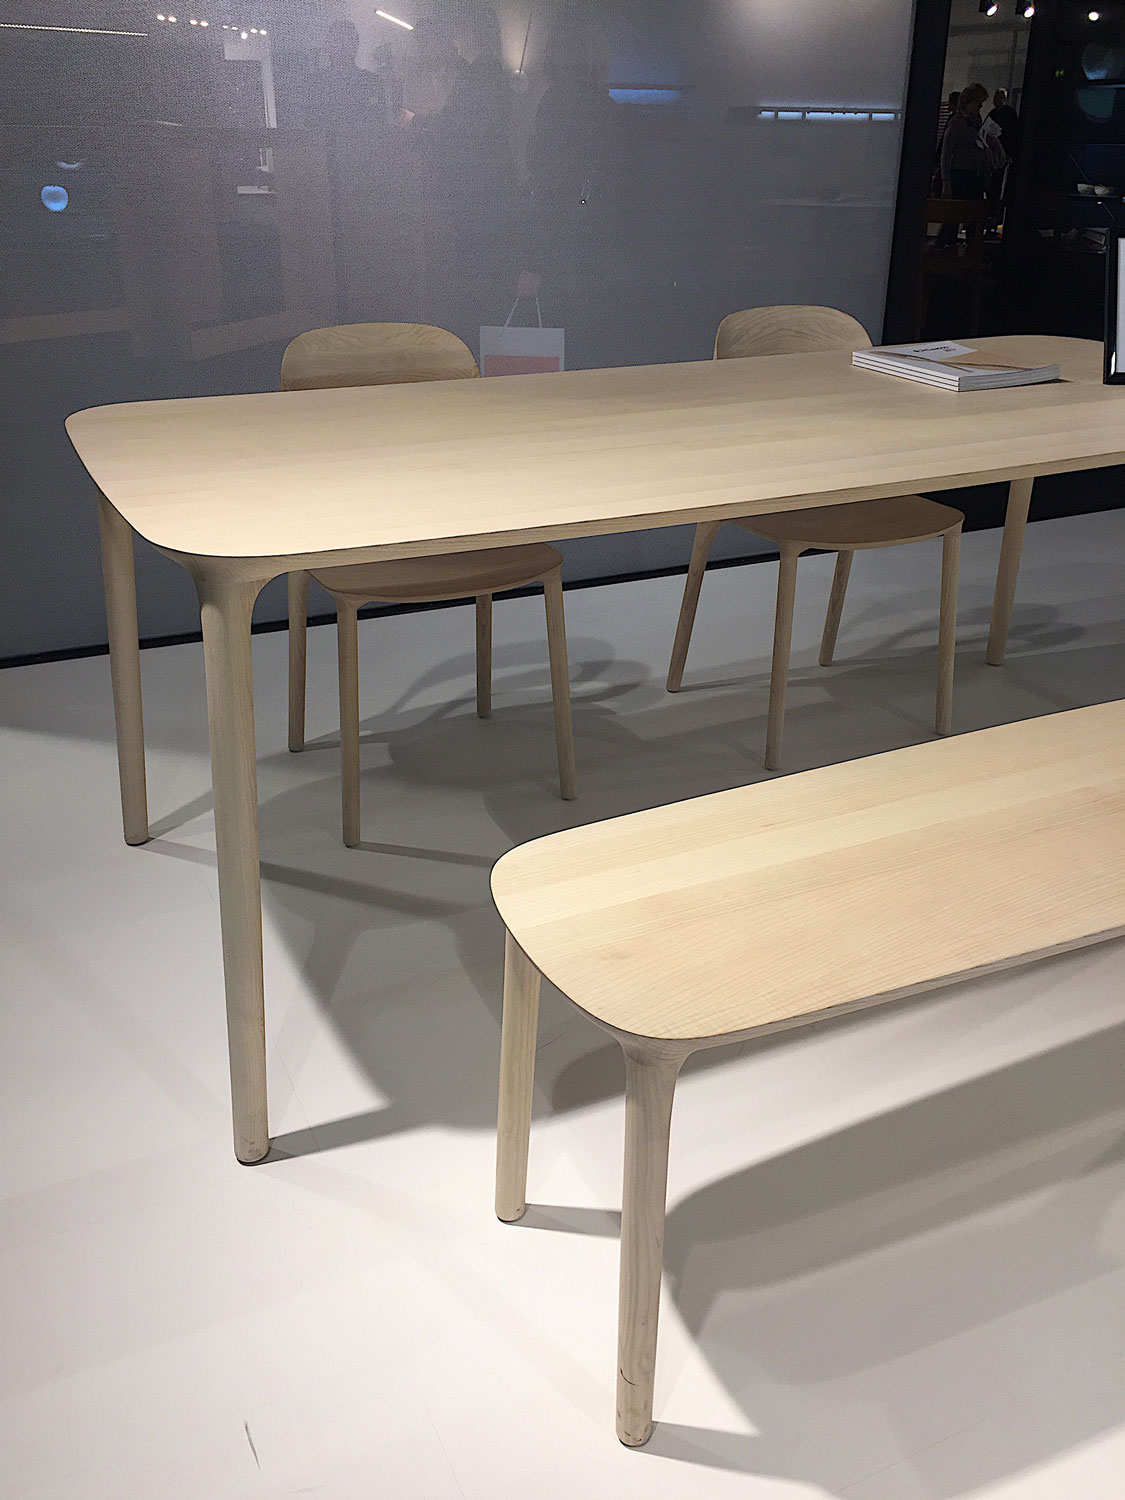 Imm Cologne 2017 trade fair interior trends wood table chairs